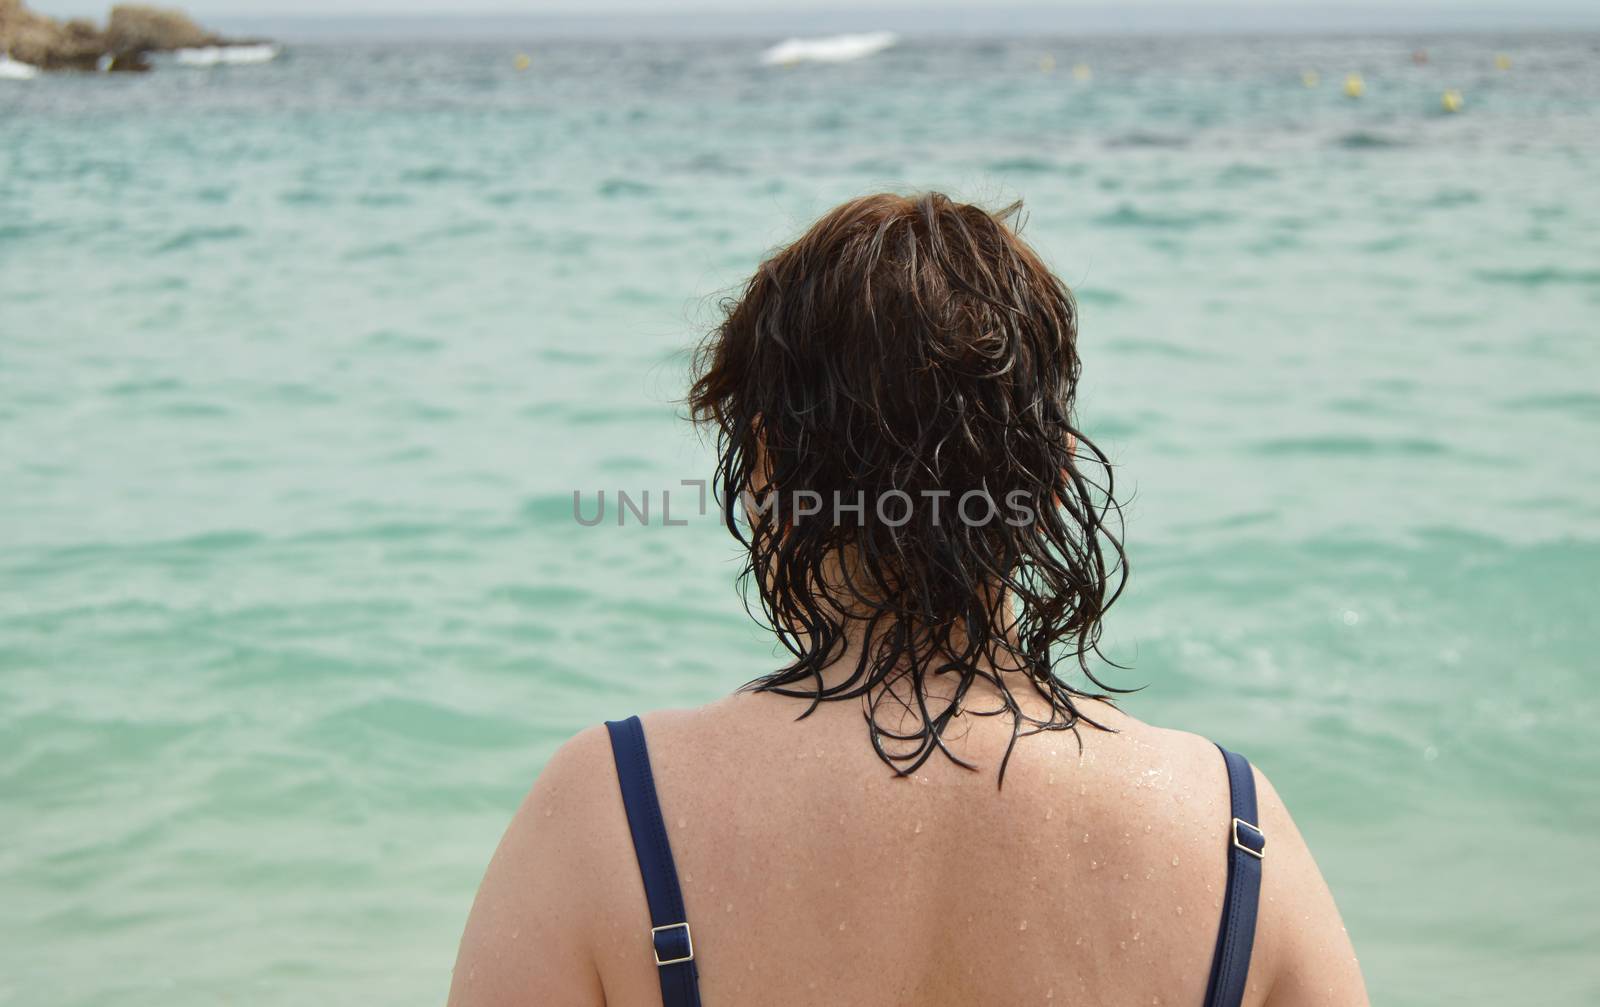 View of the back of an adult woman in a swimsuit with wet hair, standing on the beach and admiring the sun glare on the sea by claire_lucia